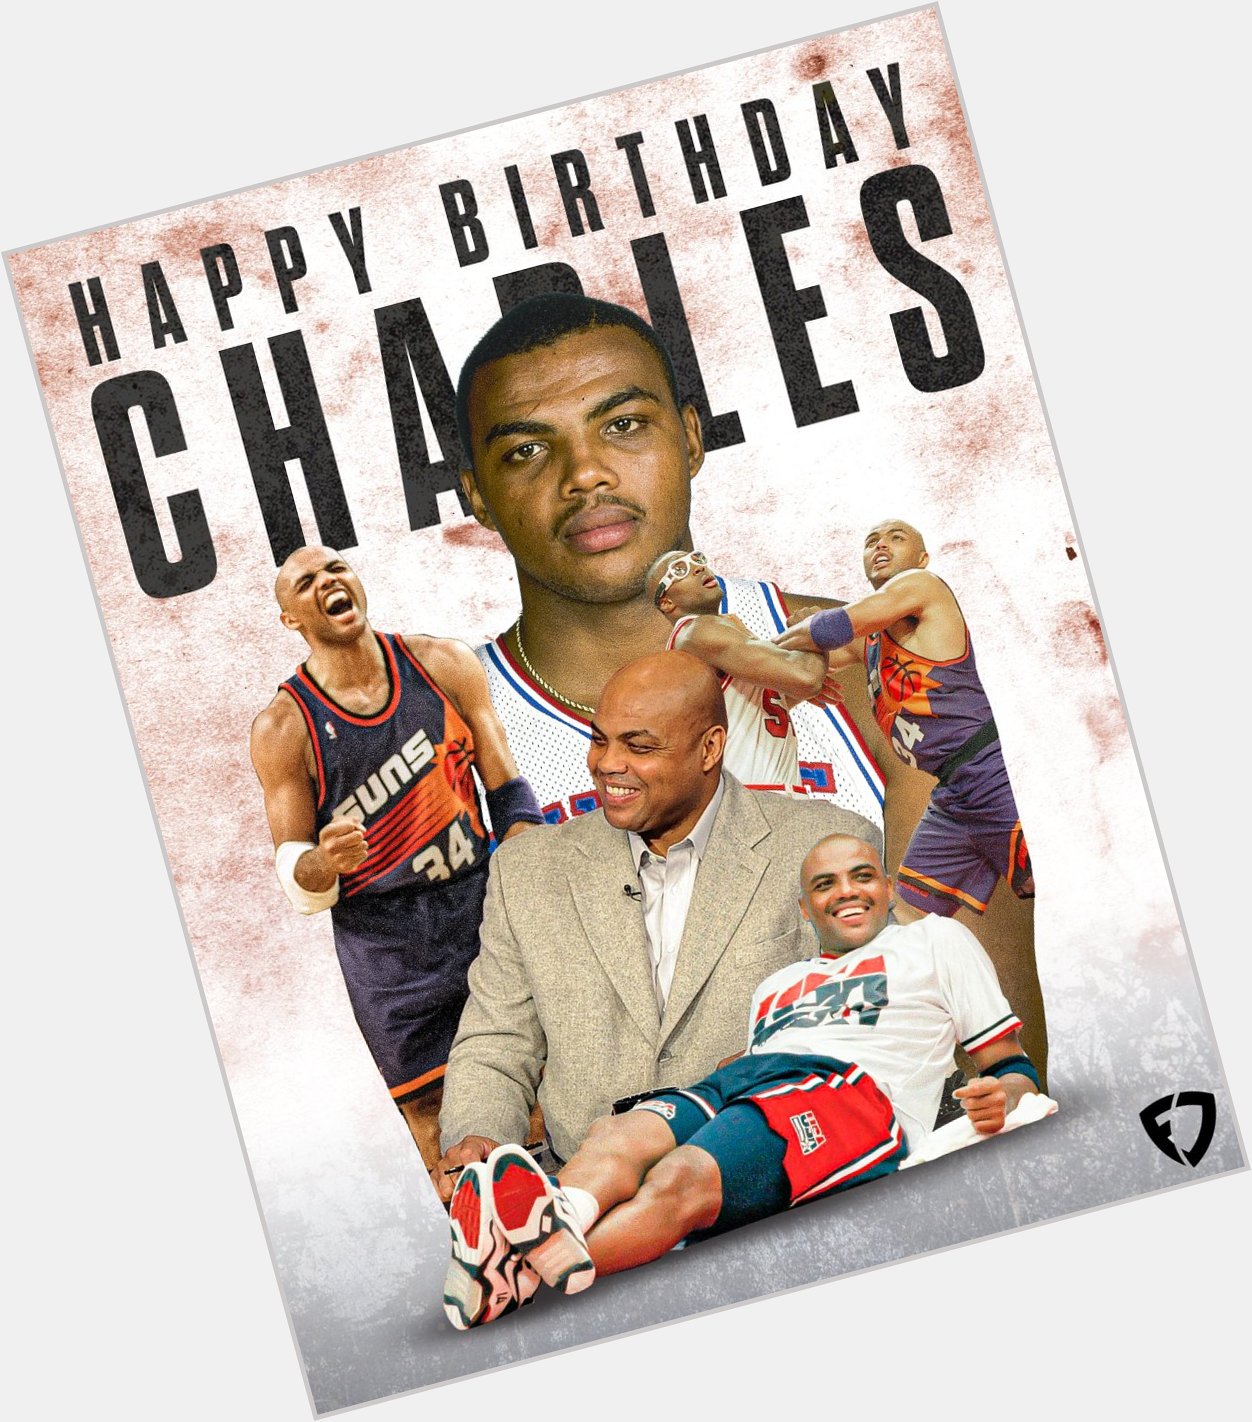 HAPPY BIRTHDAY CHARLES BARKLEY! Is Chuck the best player in NBA history to never win a ring? 